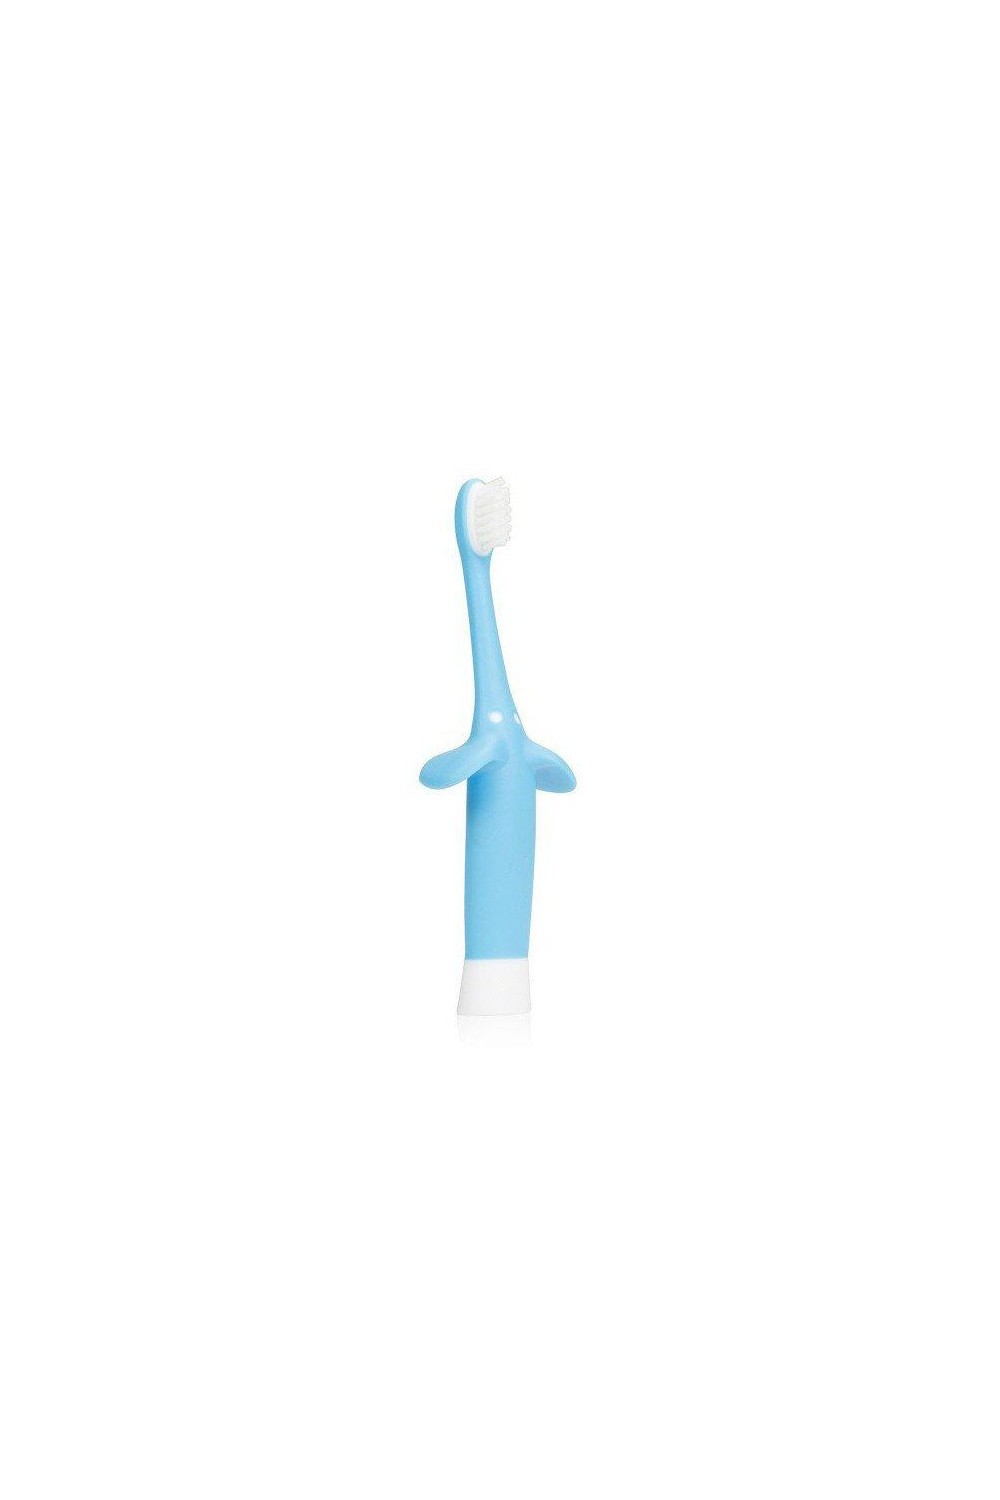 DR. BROWN'S - Dr.Brown's Toothbrush Baby Blue